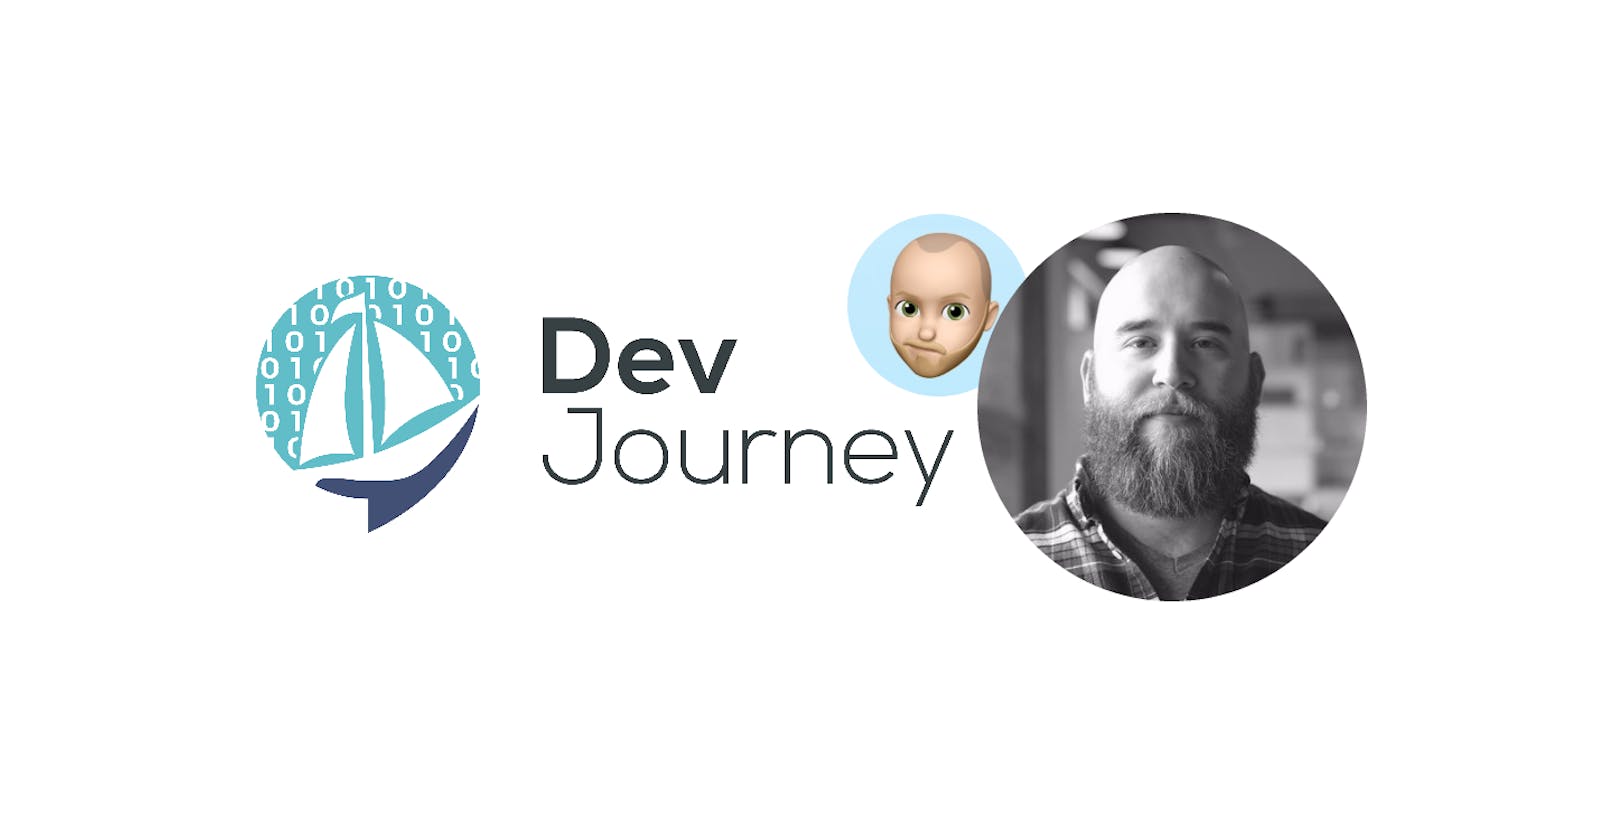 Kyle Shevlin from pastor to programmer... and other things I learned recording his DevJourney